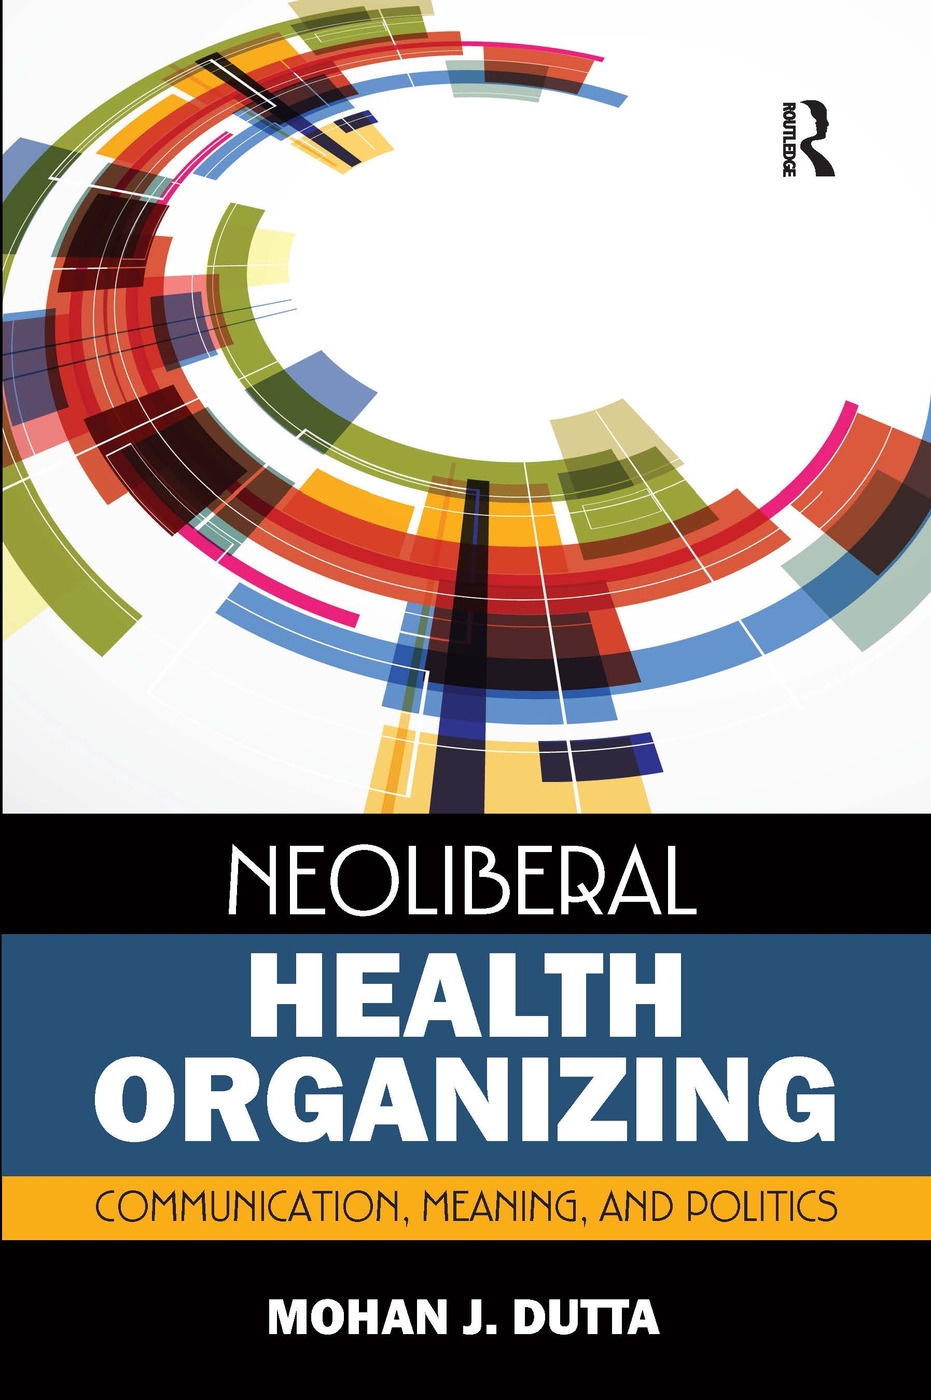 Neoliberal Health Organizing: Communication, Meaning, and Politics